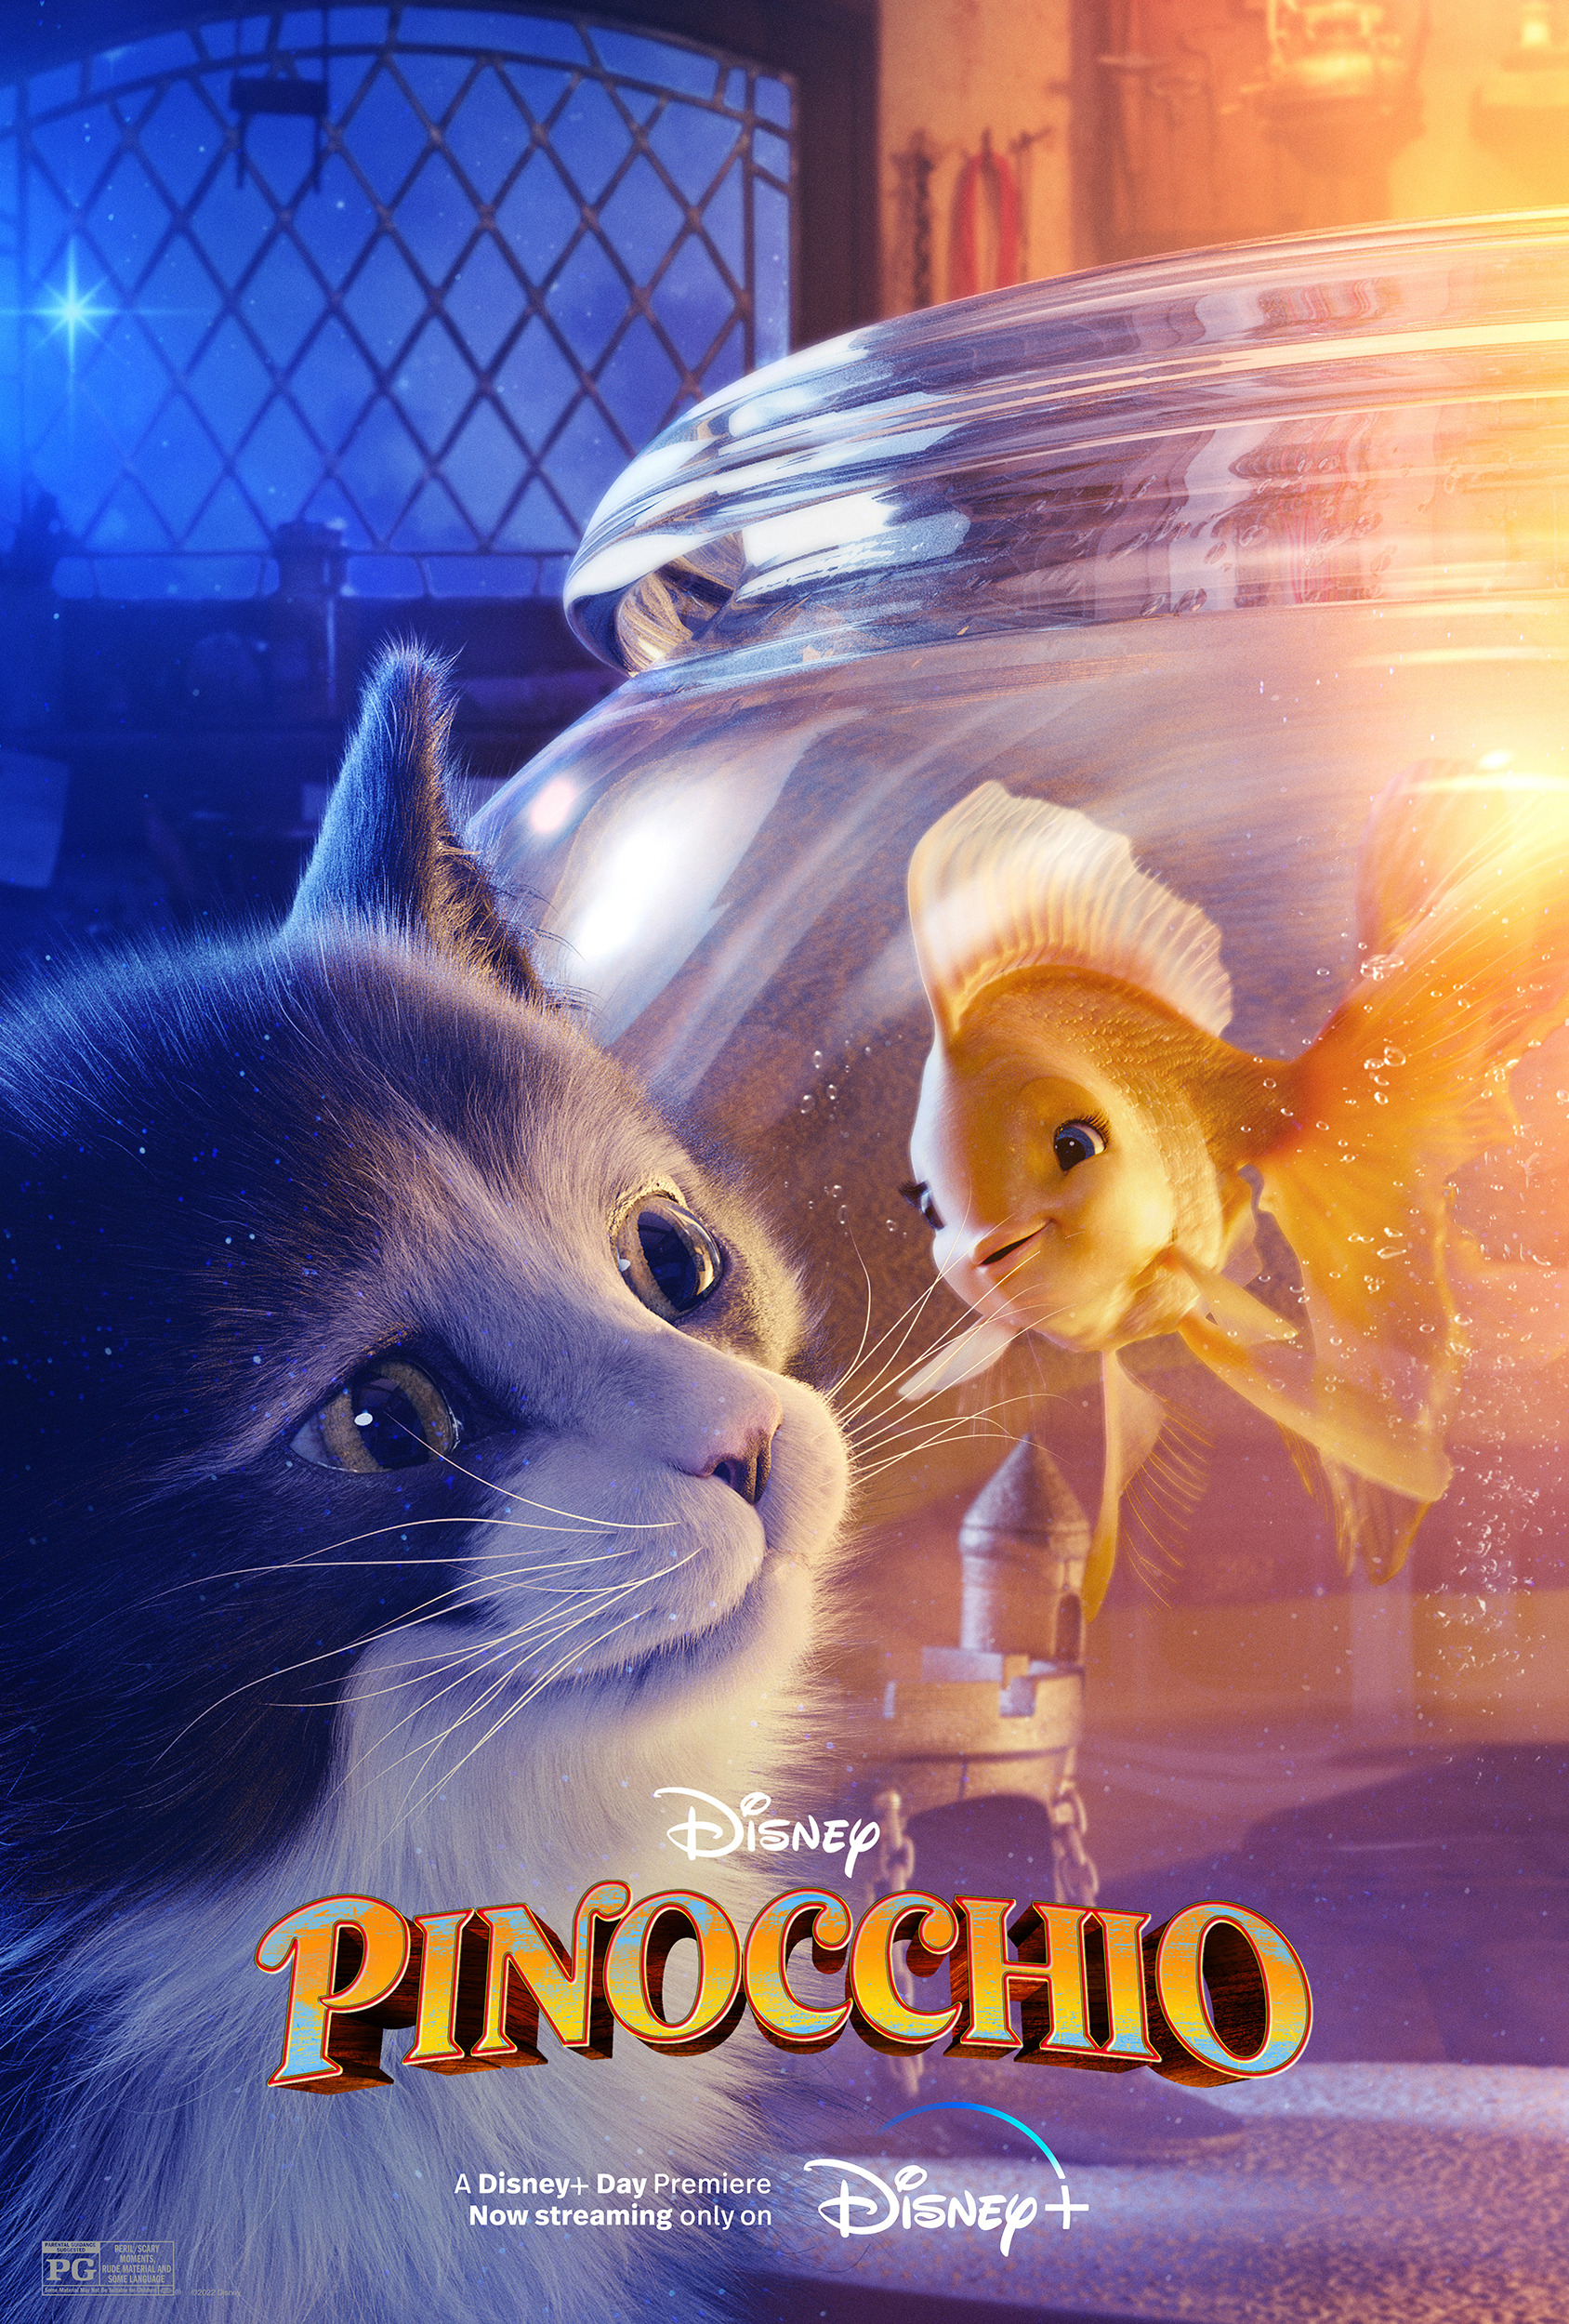 Mega Sized Movie Poster Image for Pinocchio (#11 of 17)